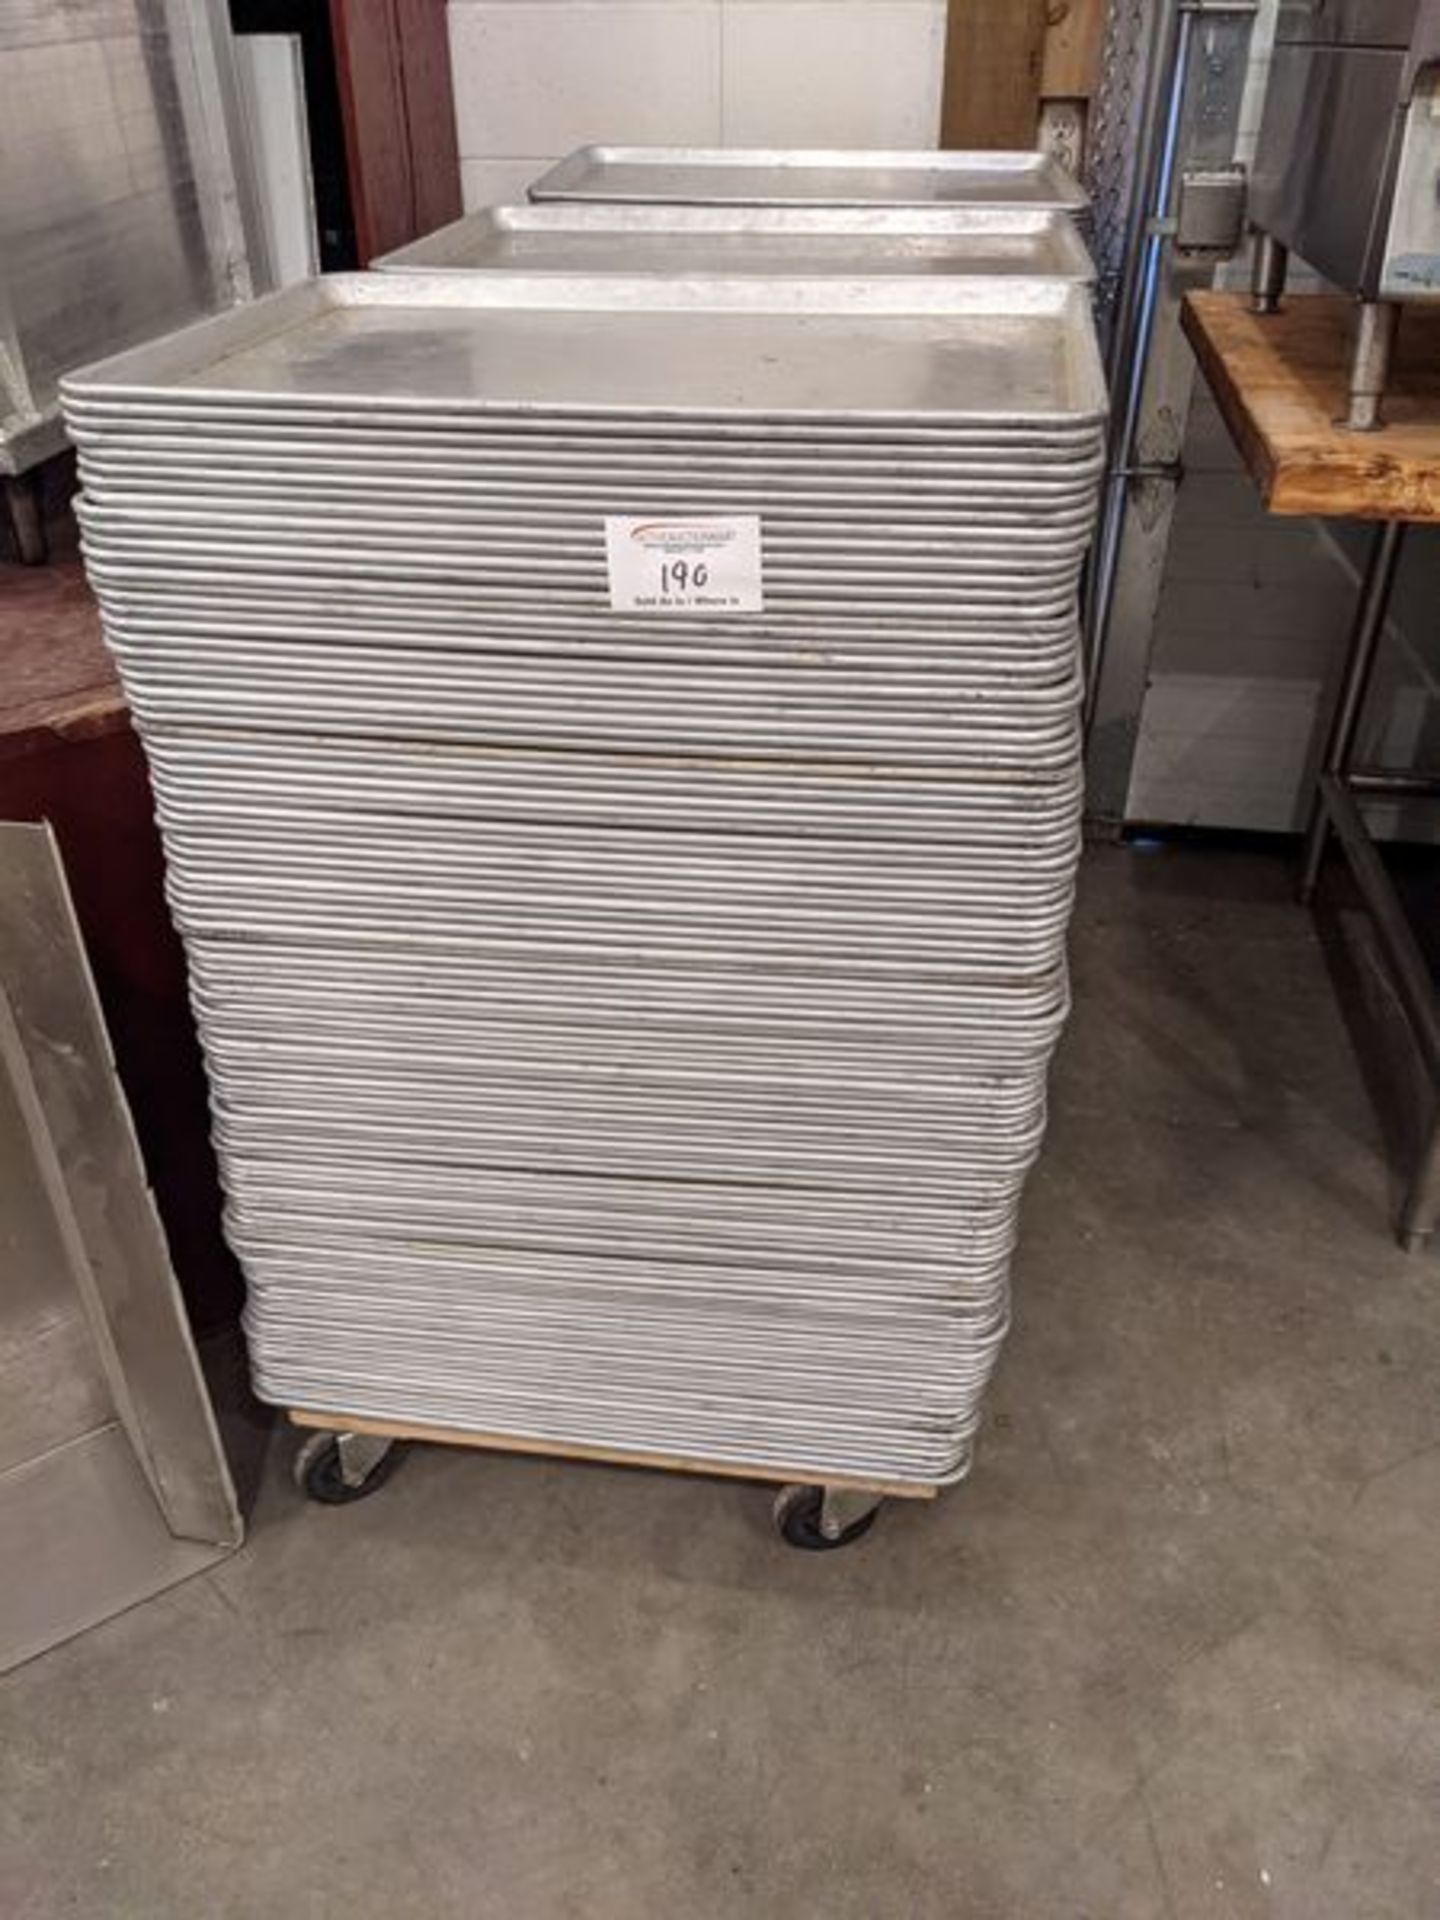 4 Wheel Cart with Approx. 98 Aluminum Trays